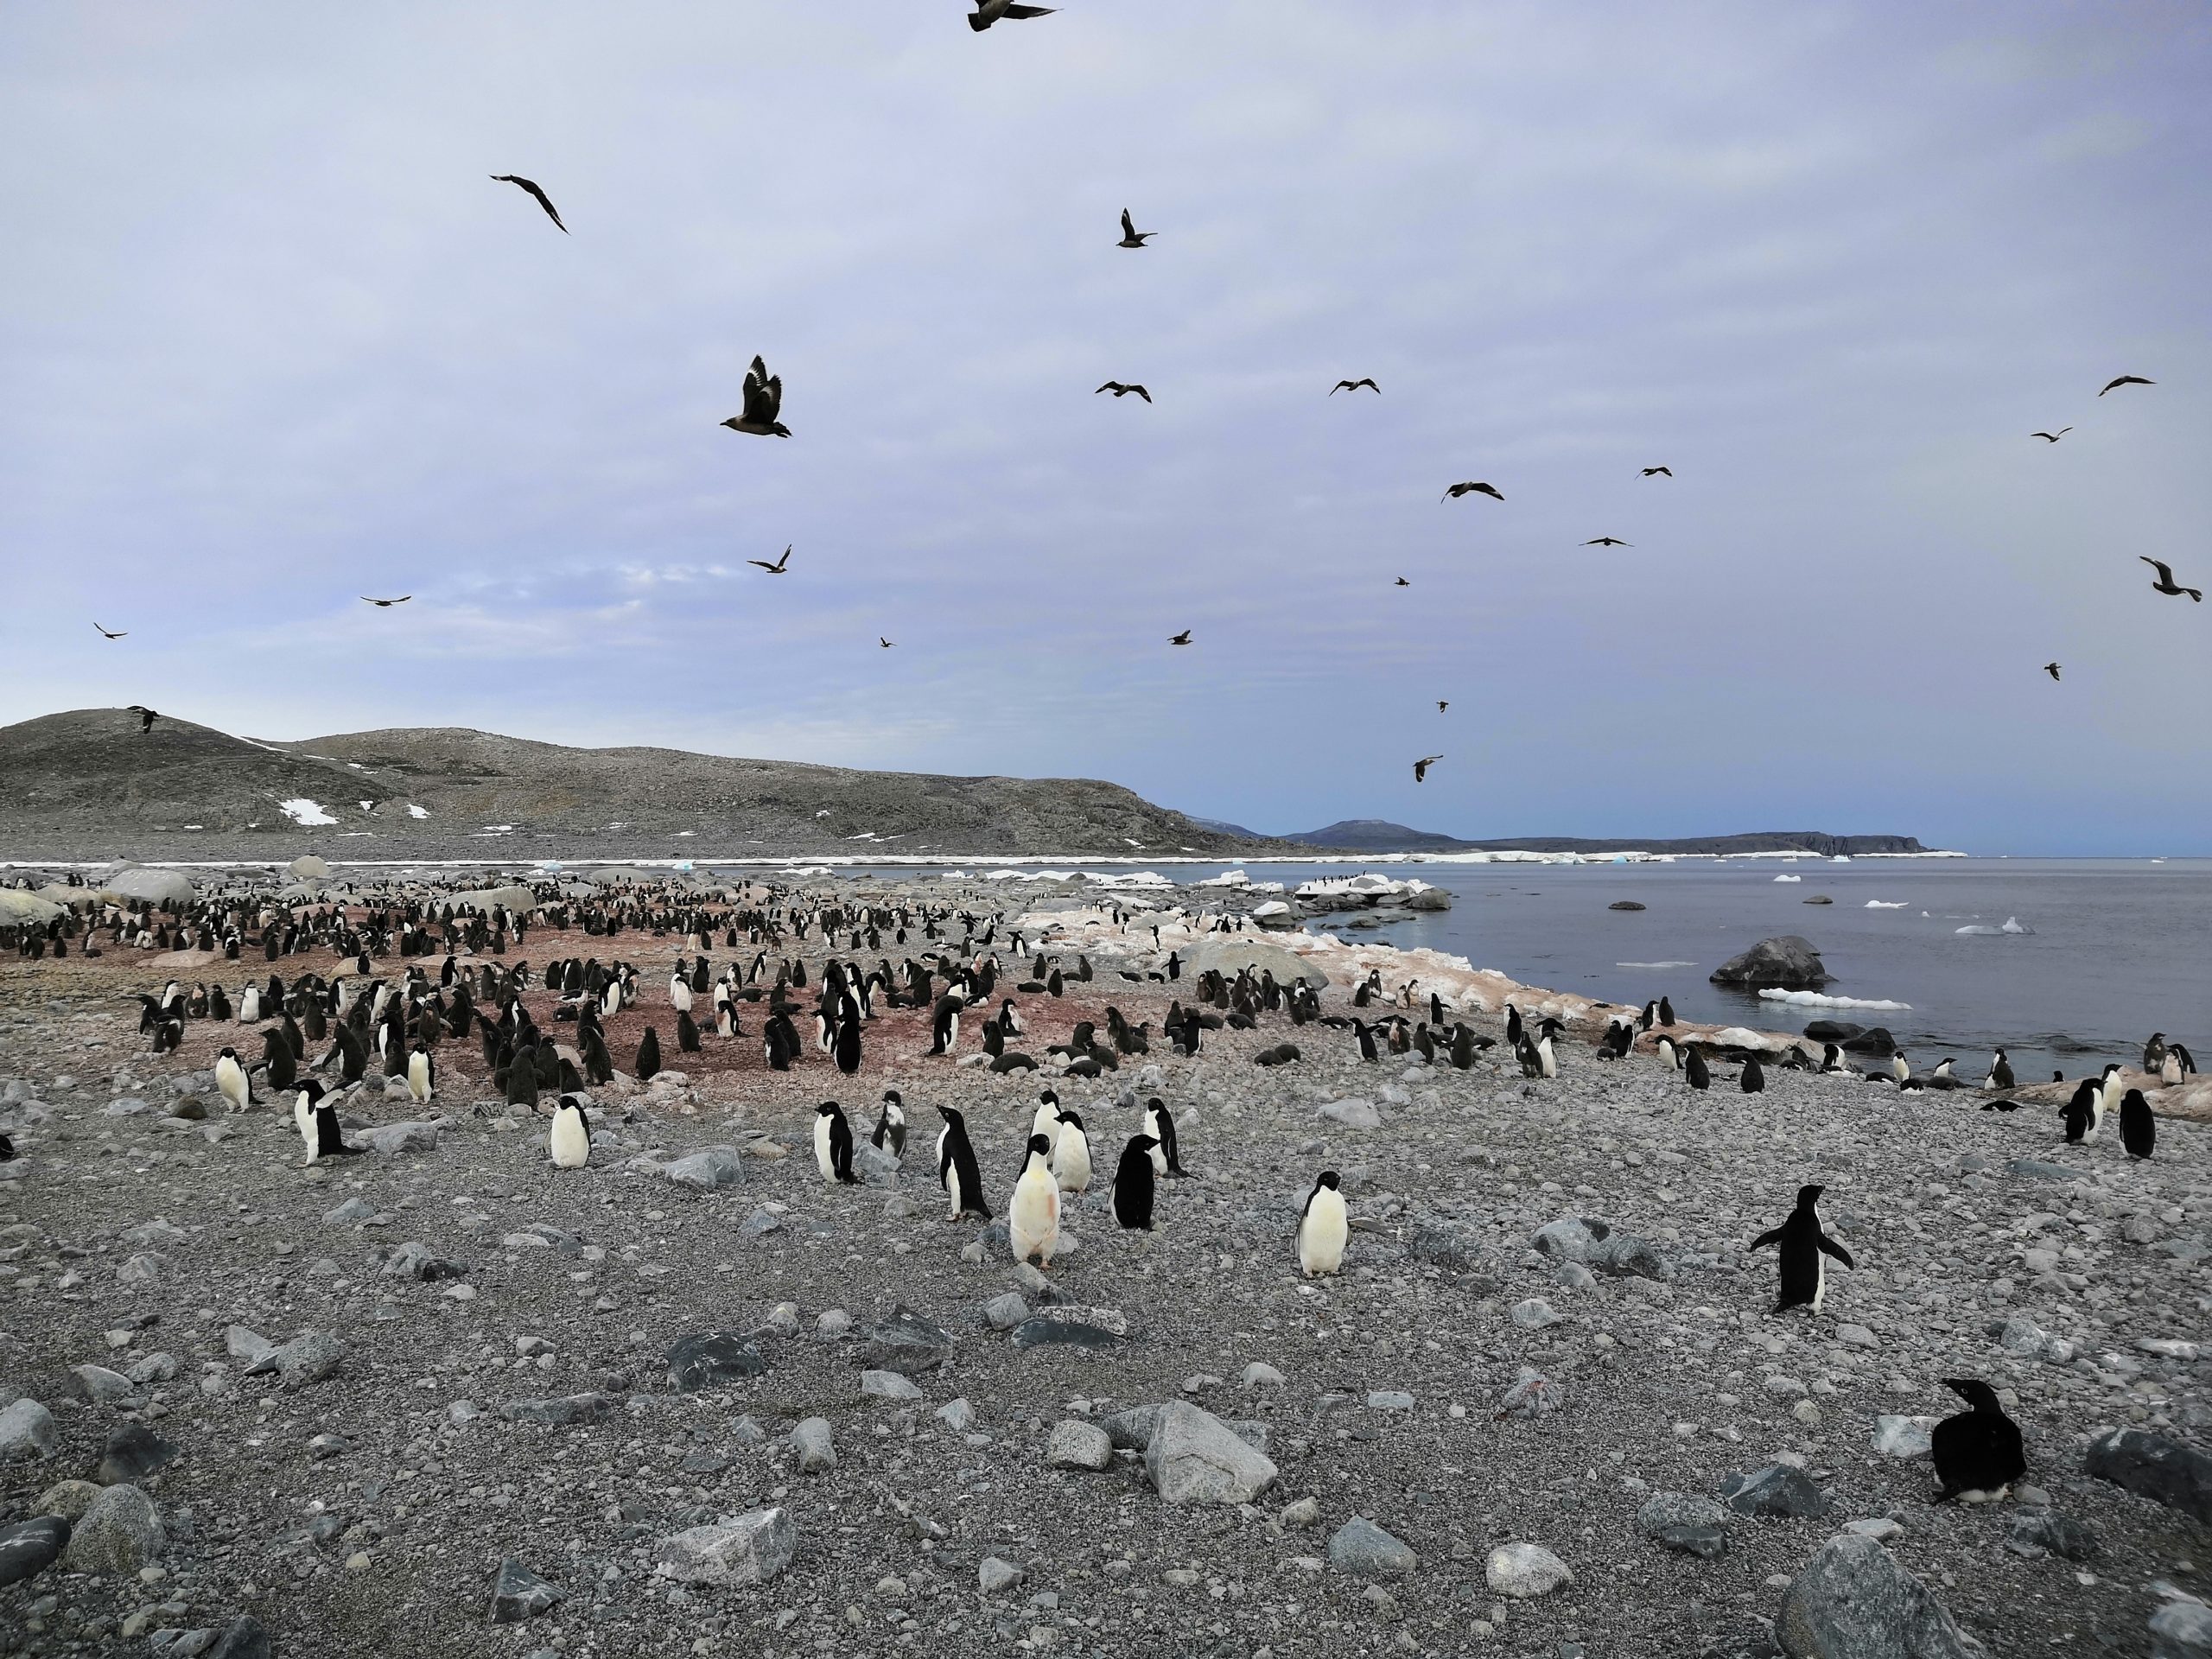 A colony of penguins standing on grey rocks and sand near the edge of the ocean. Other birds fly in the cloudy sky.